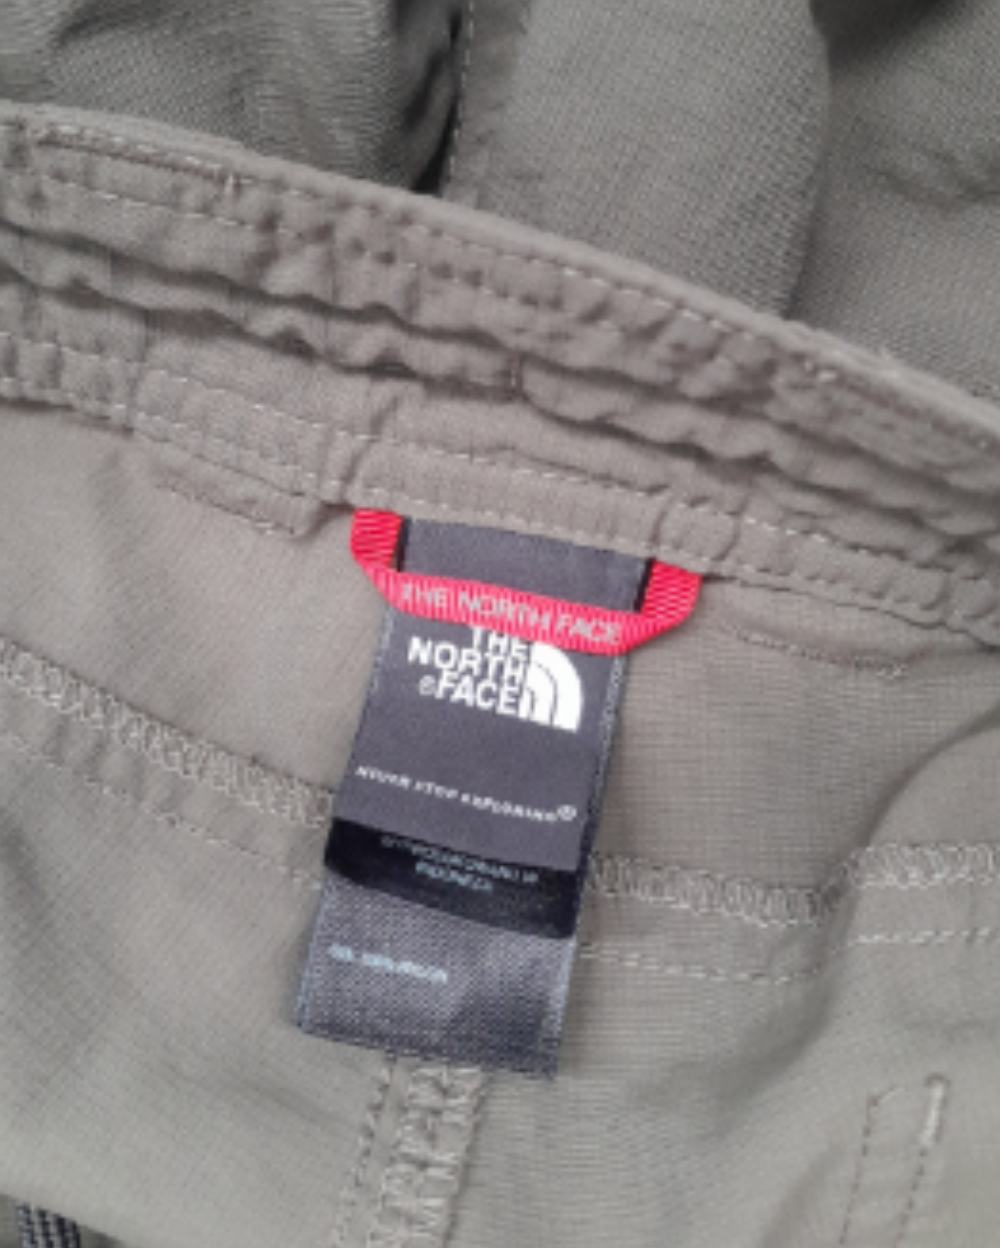 Shorts Cargo The North Face